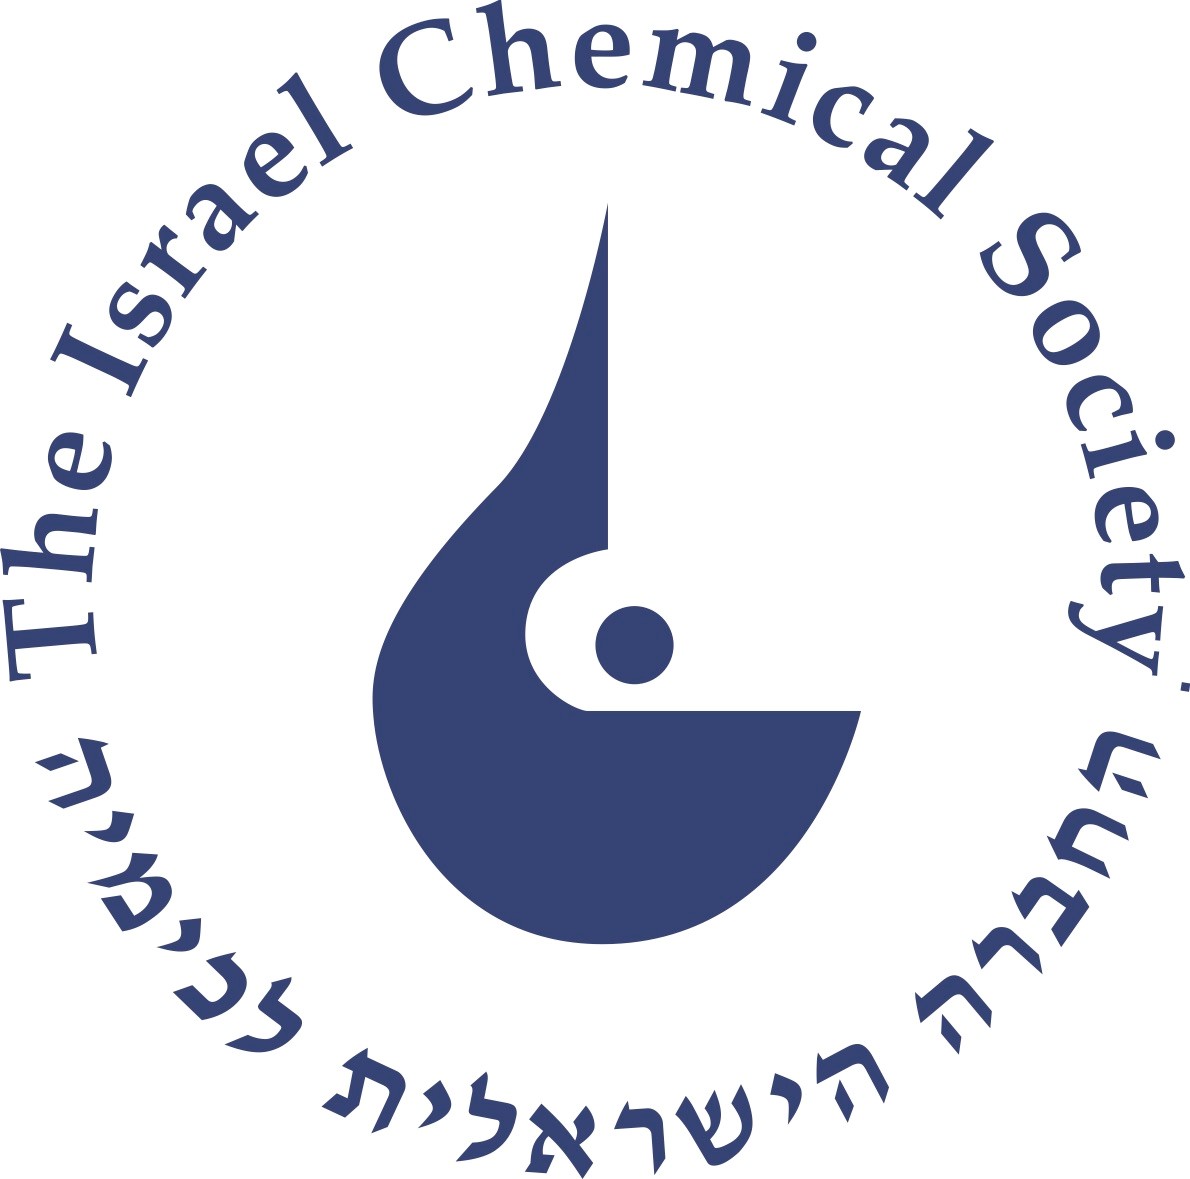 The Israel Chemical Society